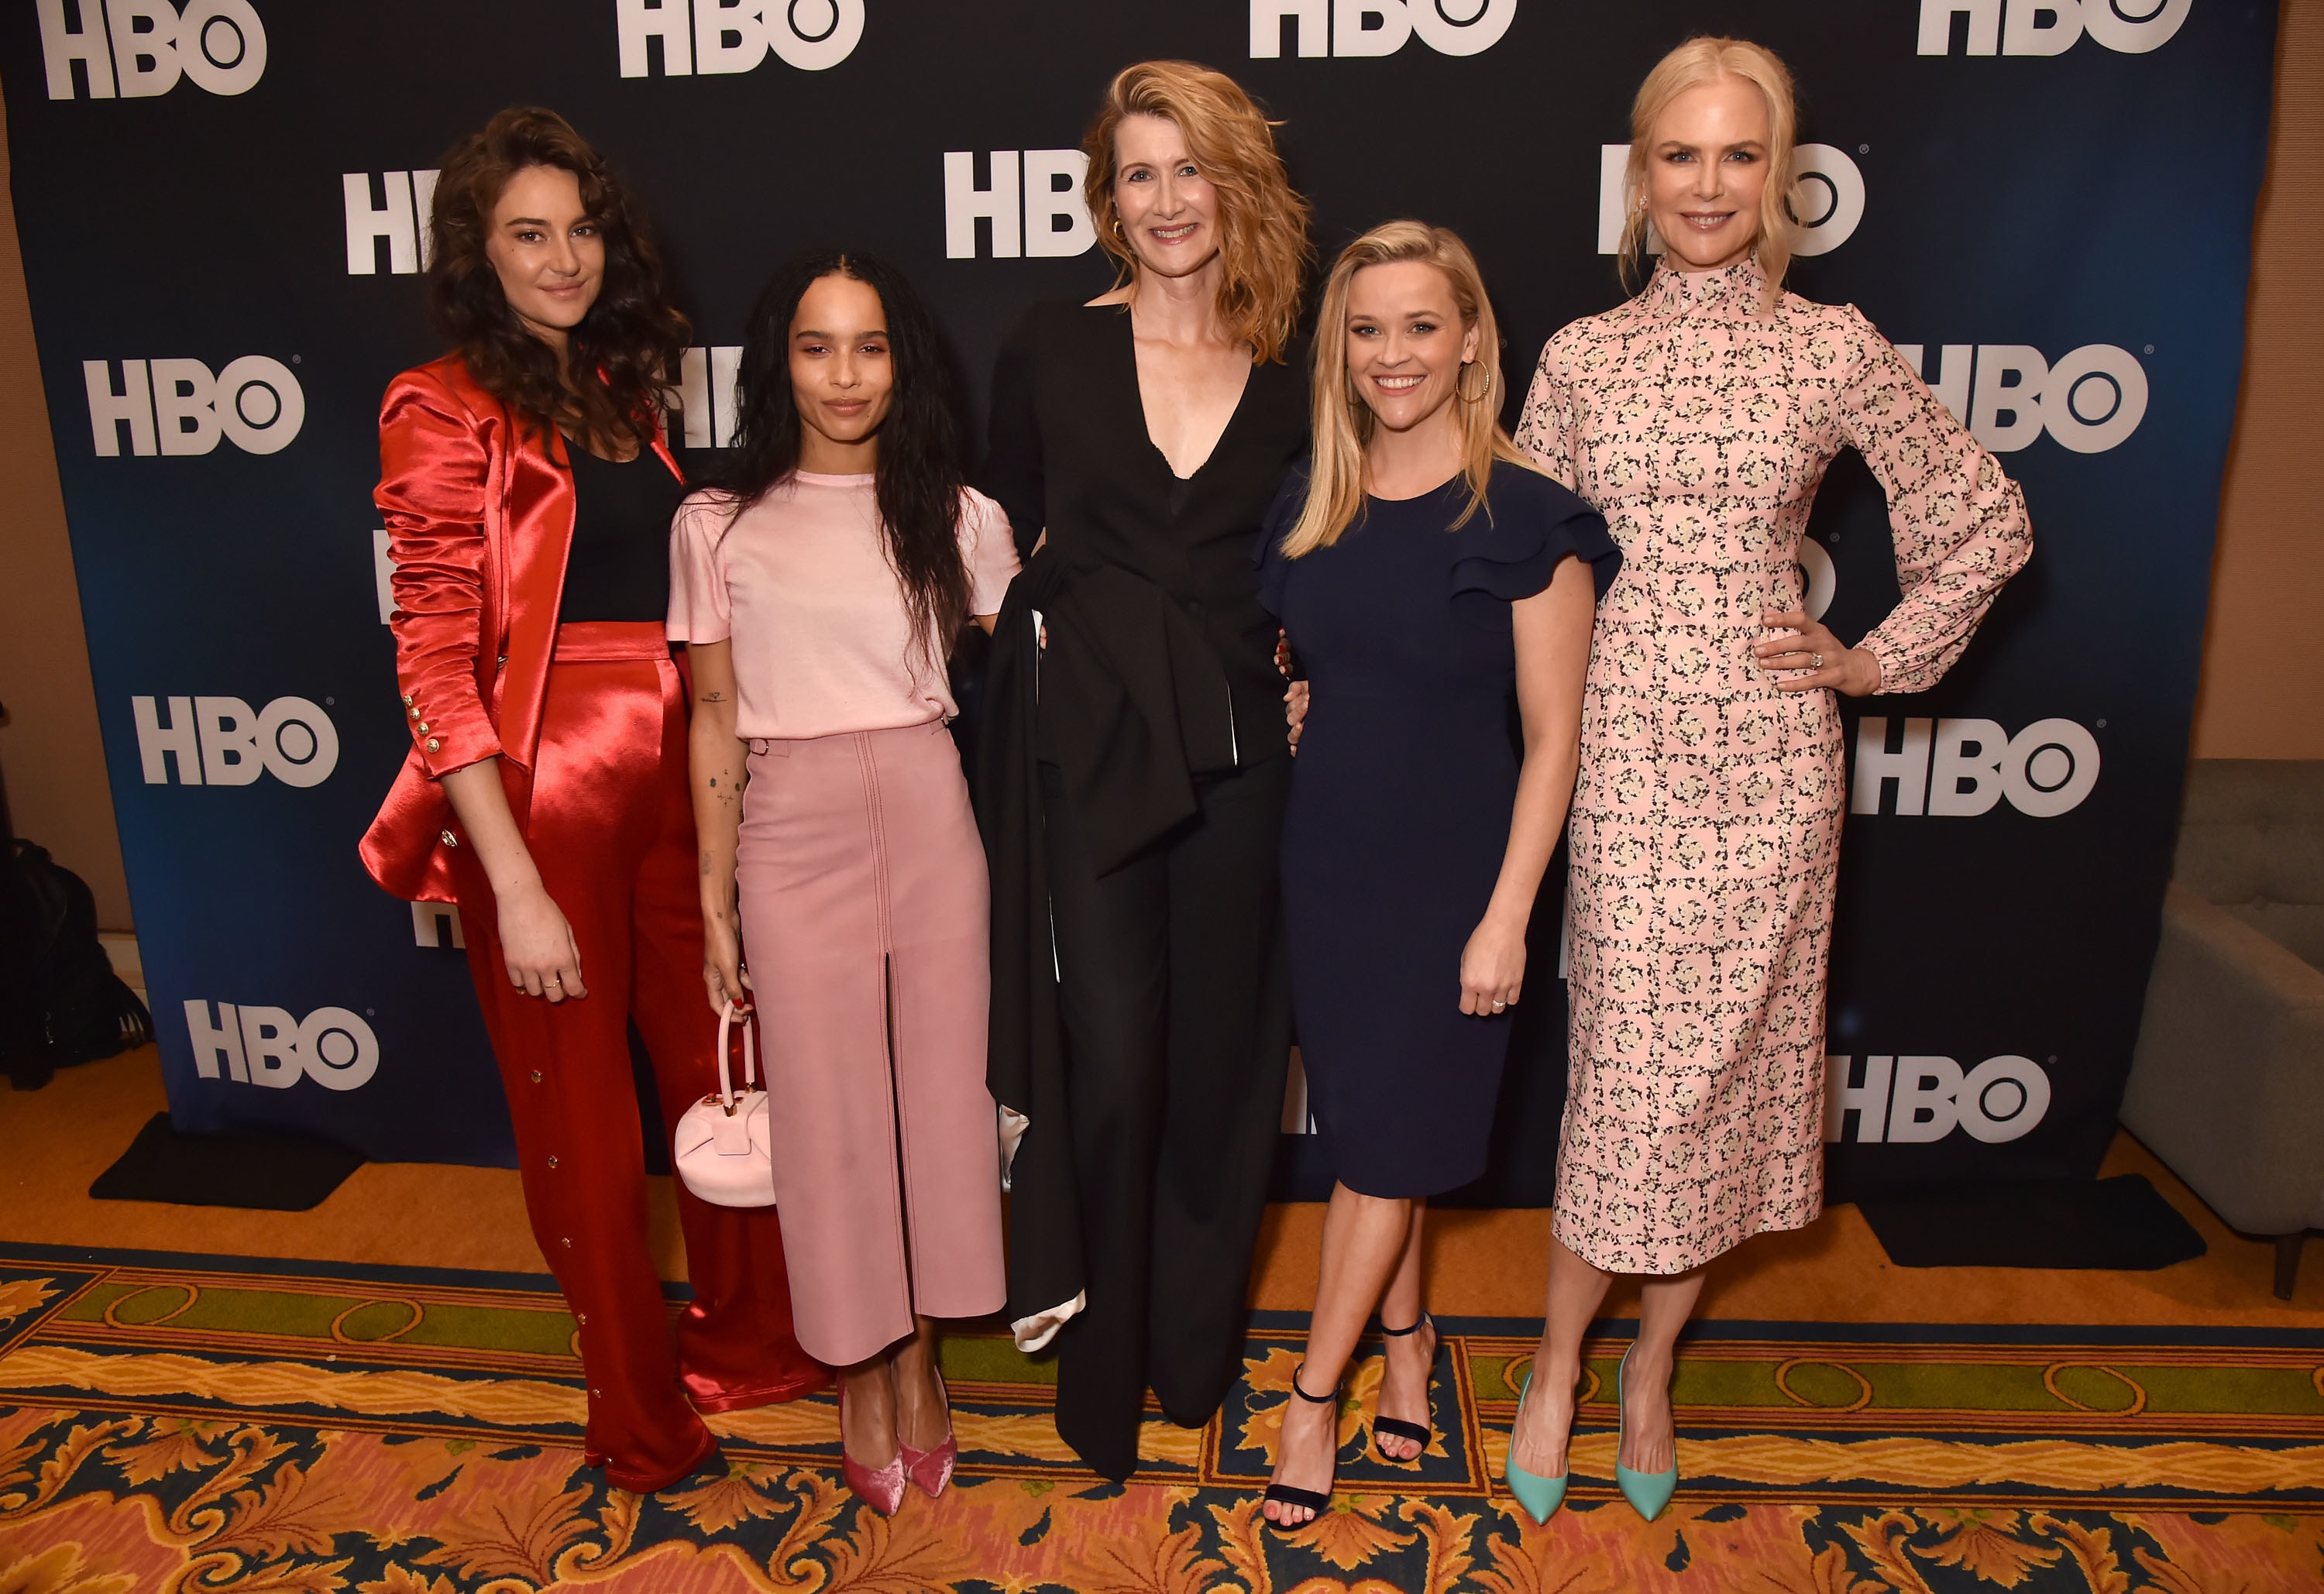 From left to right: Shailene, Zoe, Laura, Reese, and Nicole pose together for photographers at an HBO event